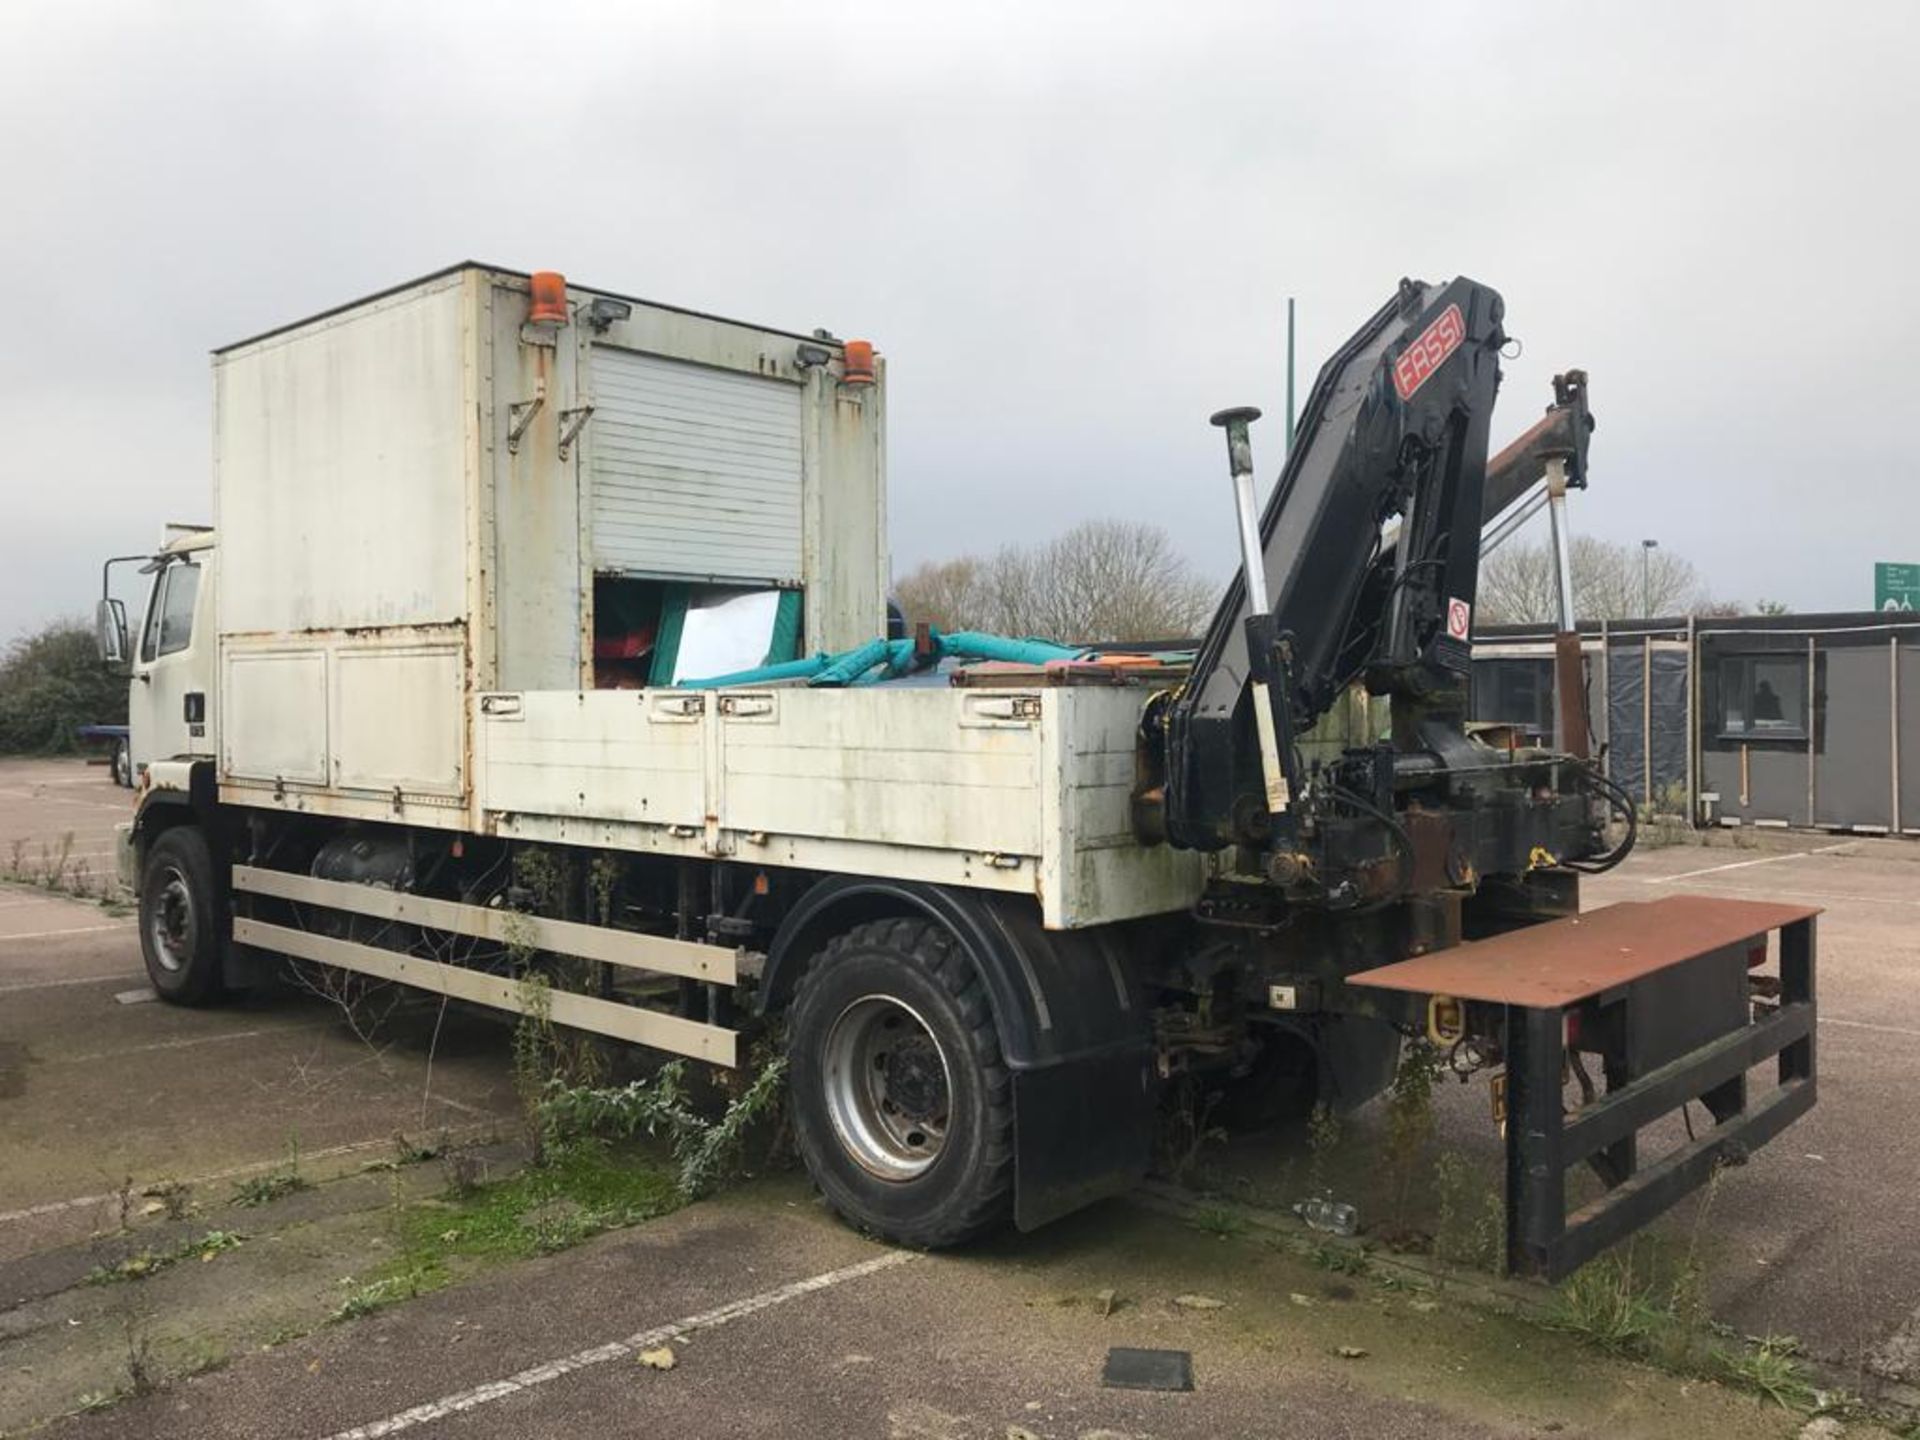 1991 Leyland DAF 180 Turbo Freighter 17.18 Truck With Fassi Loader Crane - Location: Sandwich, - Image 3 of 32